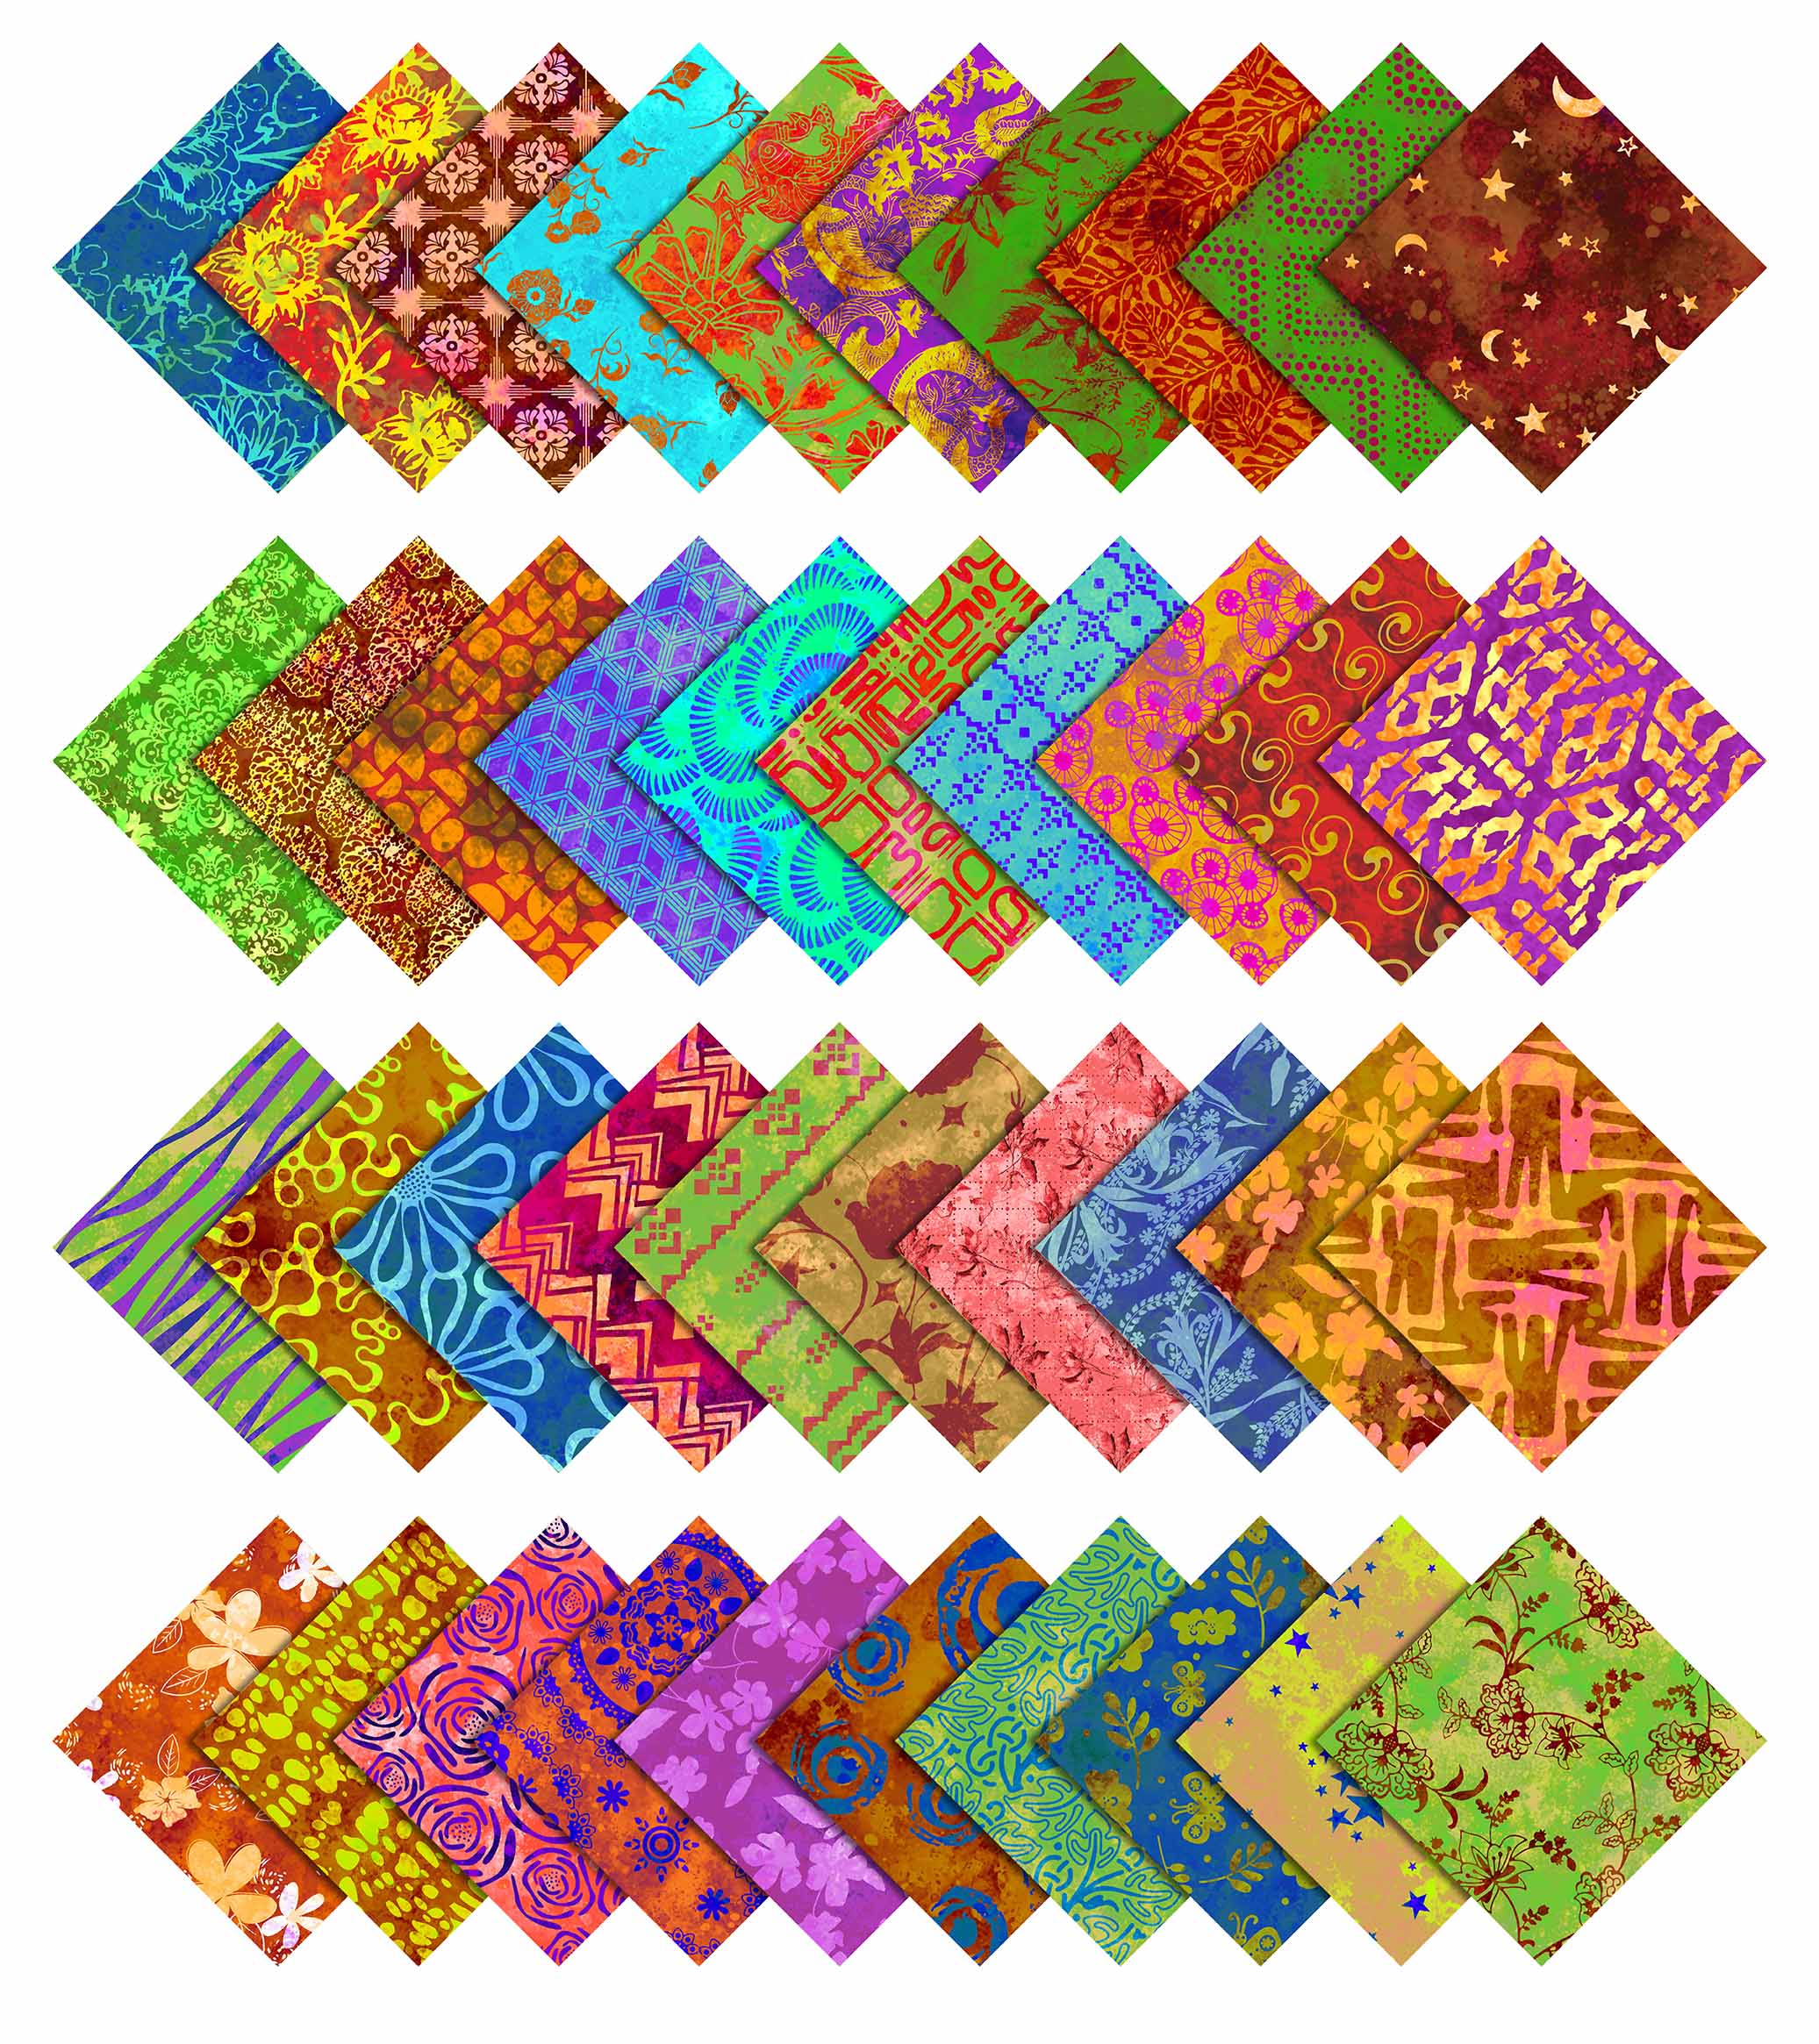 100 4 in Quilting Fabric Squares Beautiful Batiks#2--20 different colors/BUY NOW 